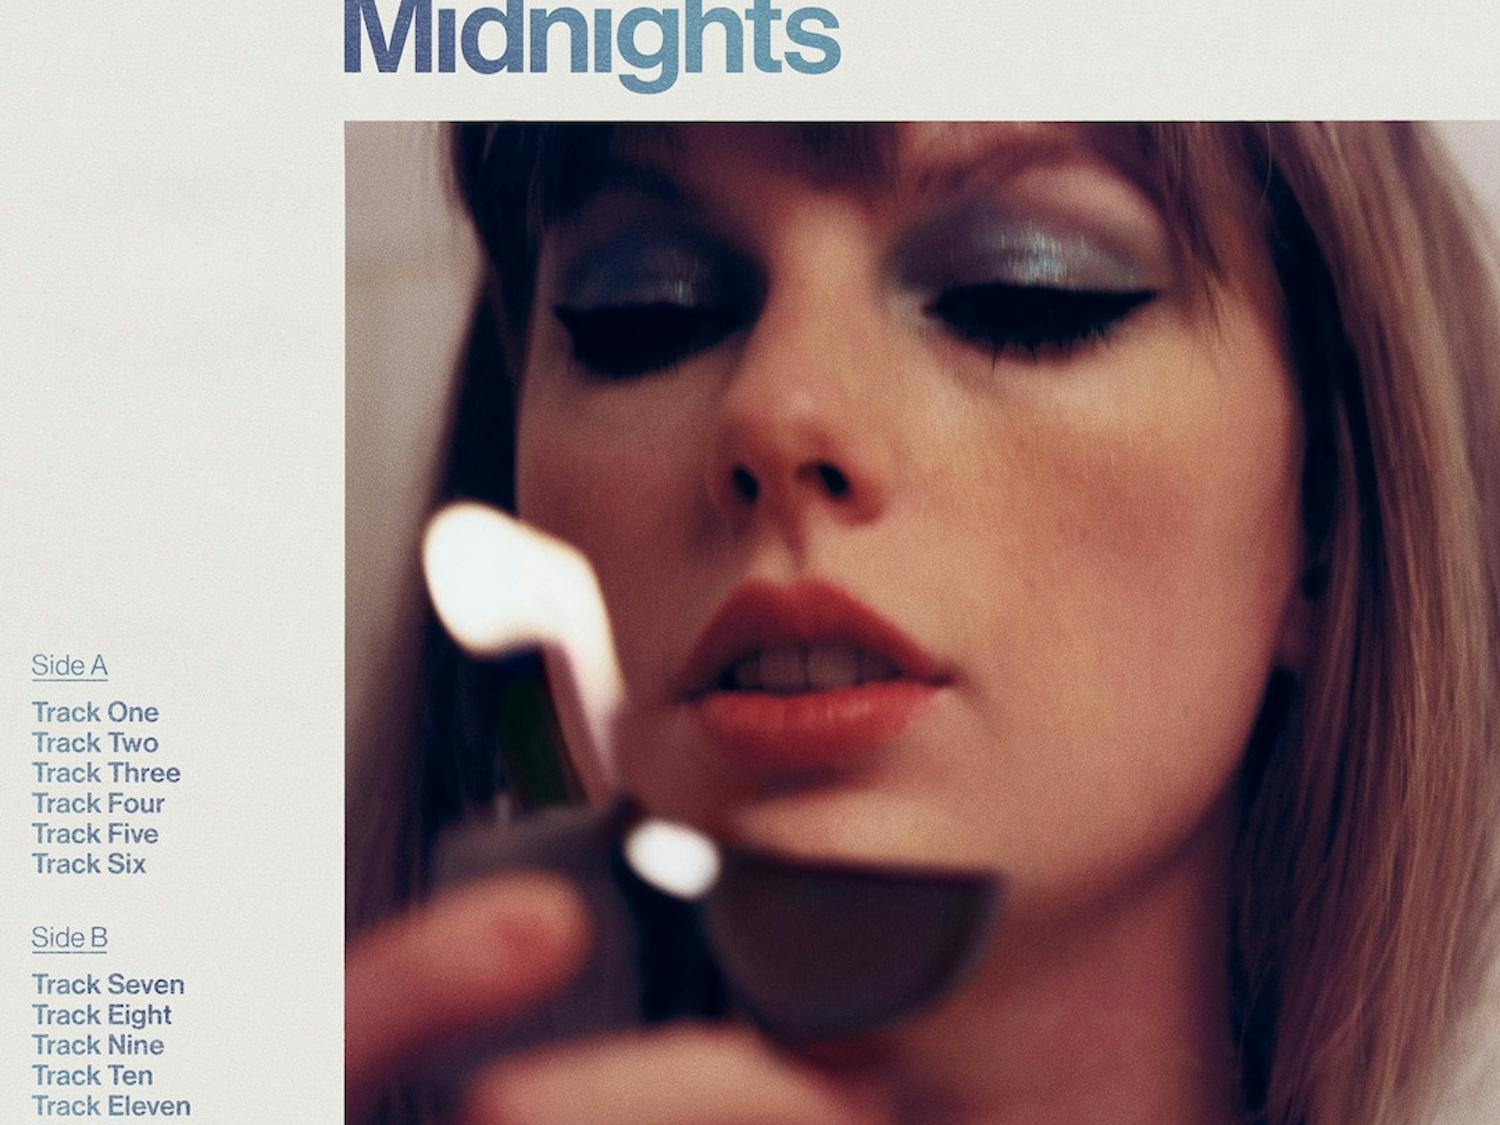 Taylor Swift cover of her Midnight Album | Credit: Spotify﻿